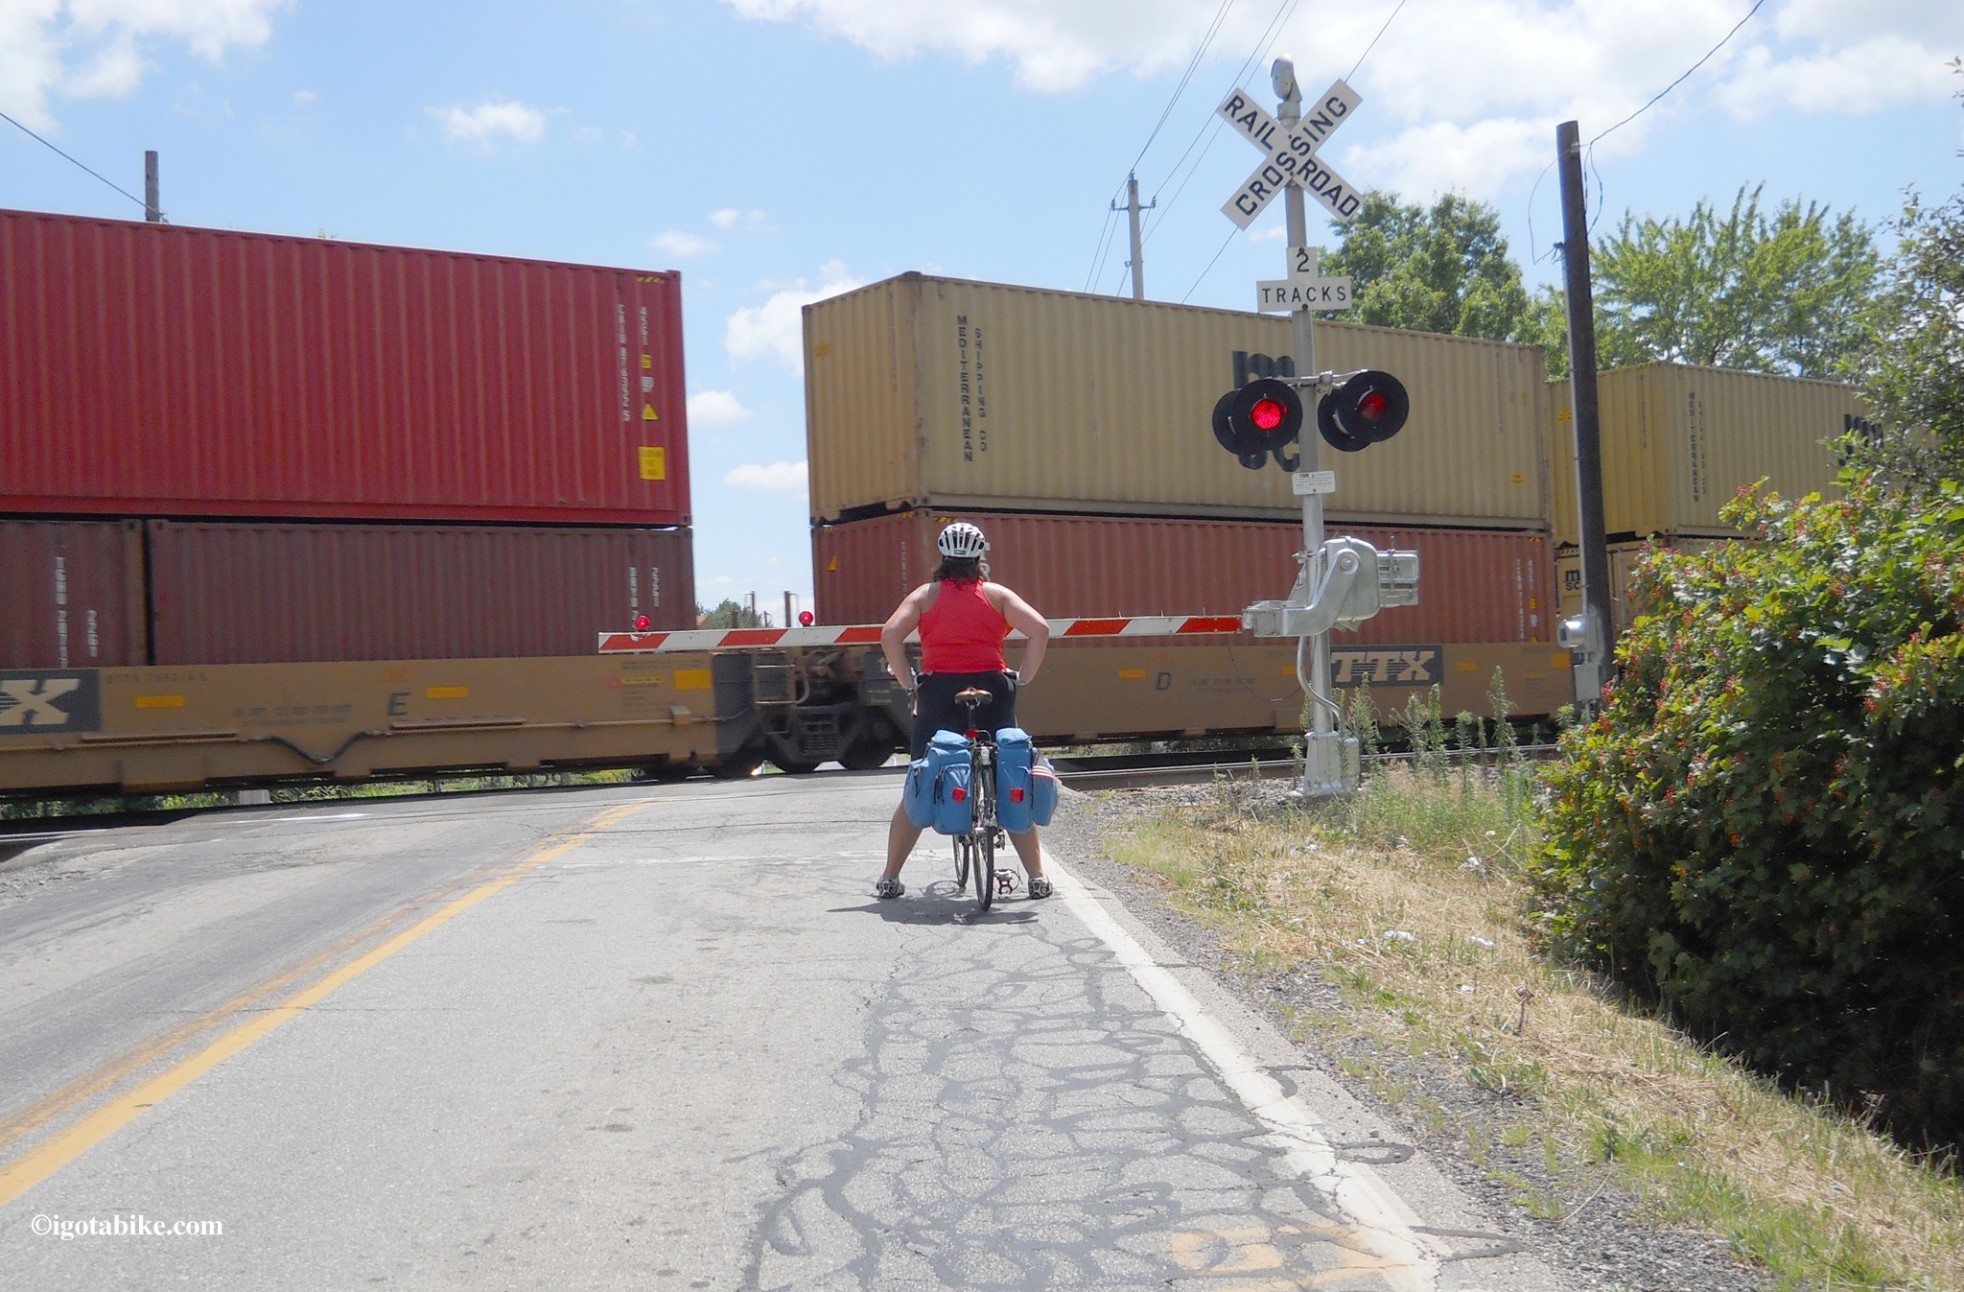 When bicycling in Lorain County you will encounter the main line tracks and the trains are going very fast!